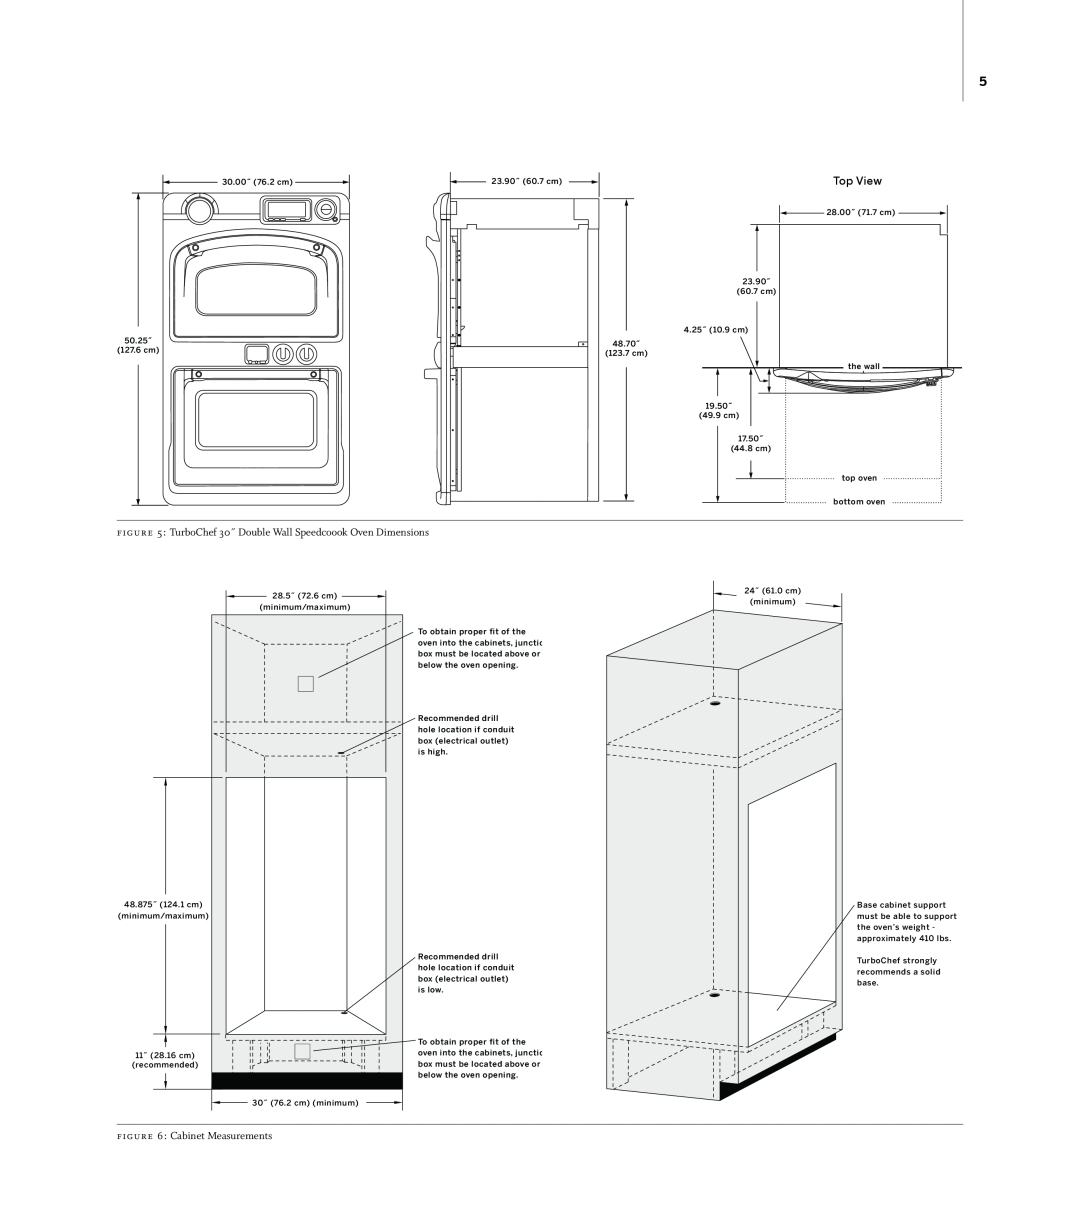 Turbo Chef Technologies TD030* 208 Top View, TurboChef 30˝ Double Wall Speedcoook Oven Dimensions, Cabinet Measurements 